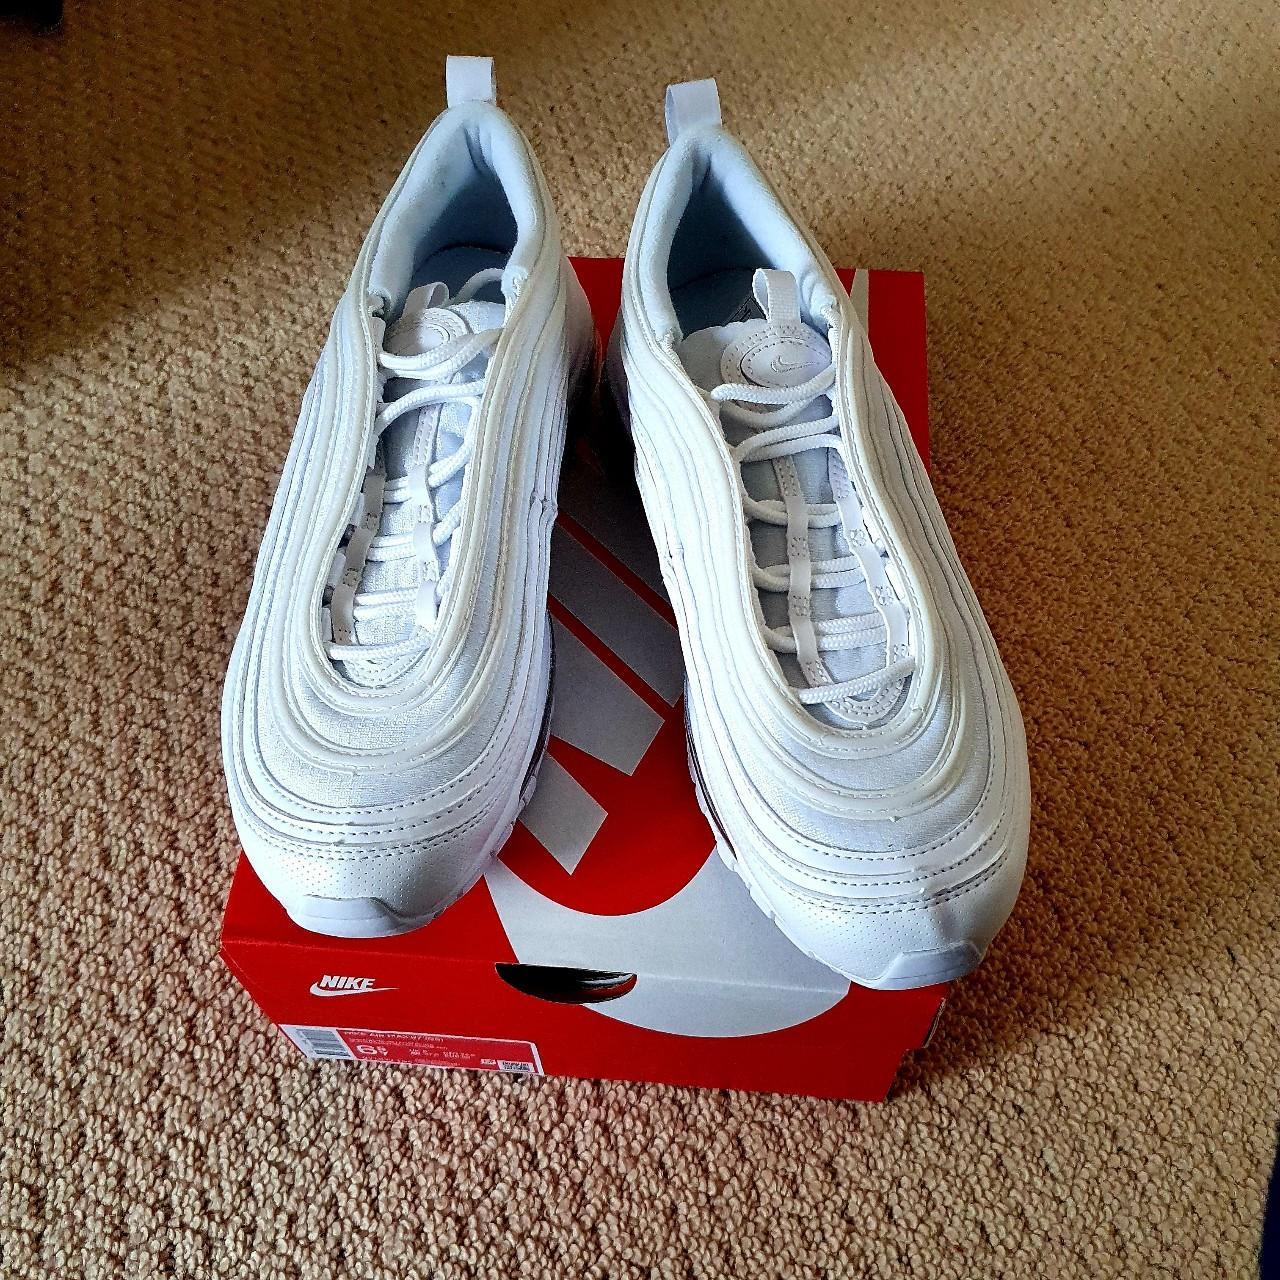 Nike Air Max 97 white trainers, brand new and unworn - Depop